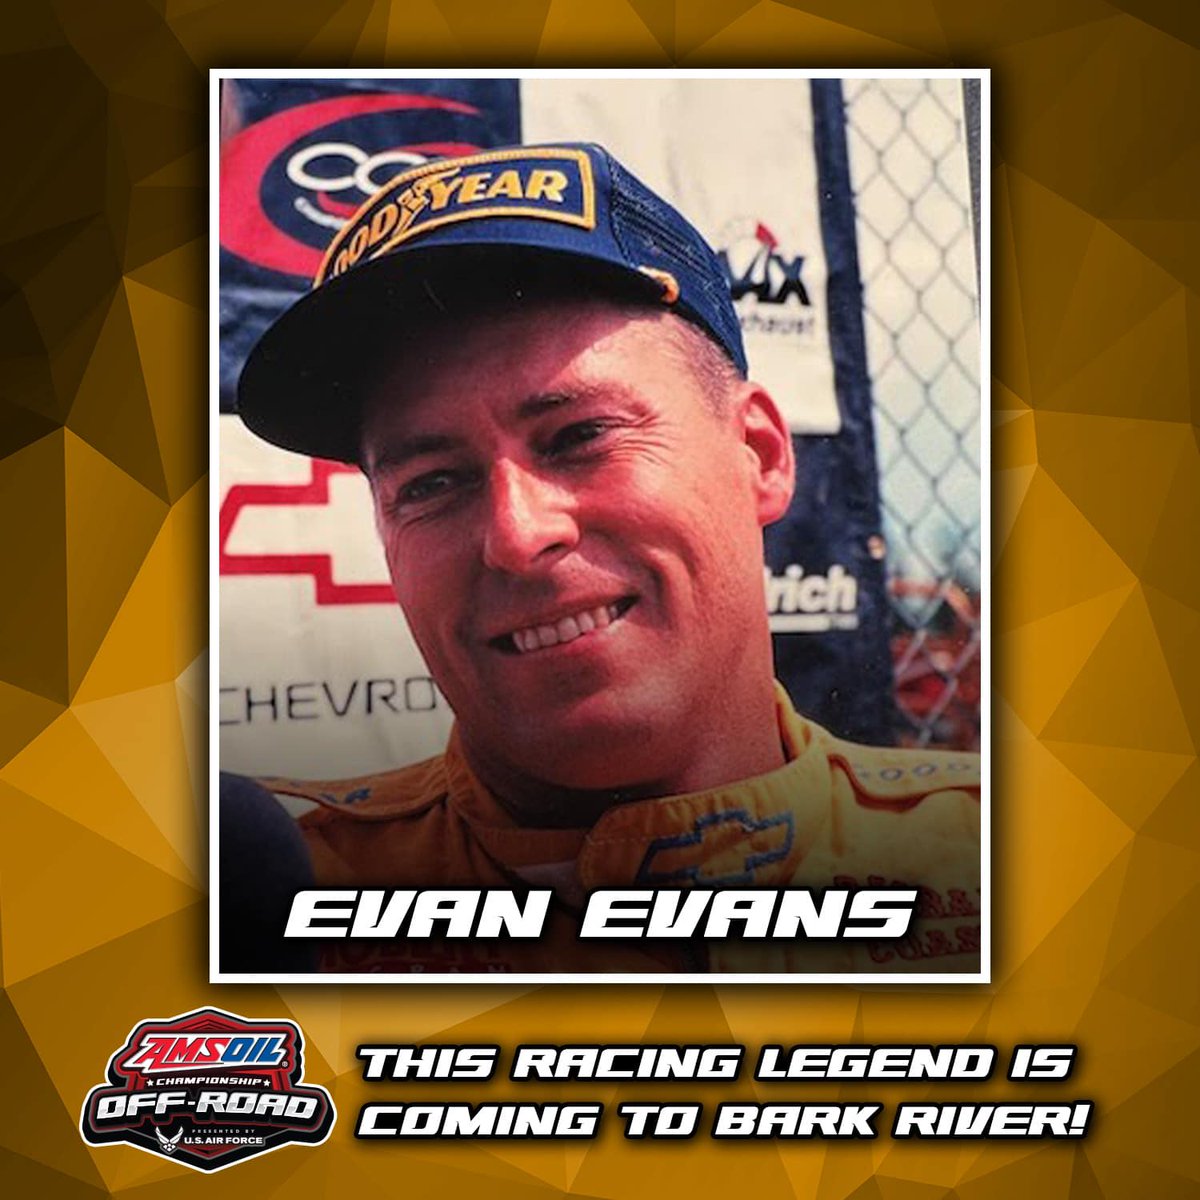 Evan Evans will be here at Bark River this weekend! When you see him, be sure to say hello. You can even find him at the Pro Autograph session on Saturday from 1:30-2:30 EST. 

Welcome back, Evan! 

#amsoiloffroad #champoffroad #offroad2023 #barkriver